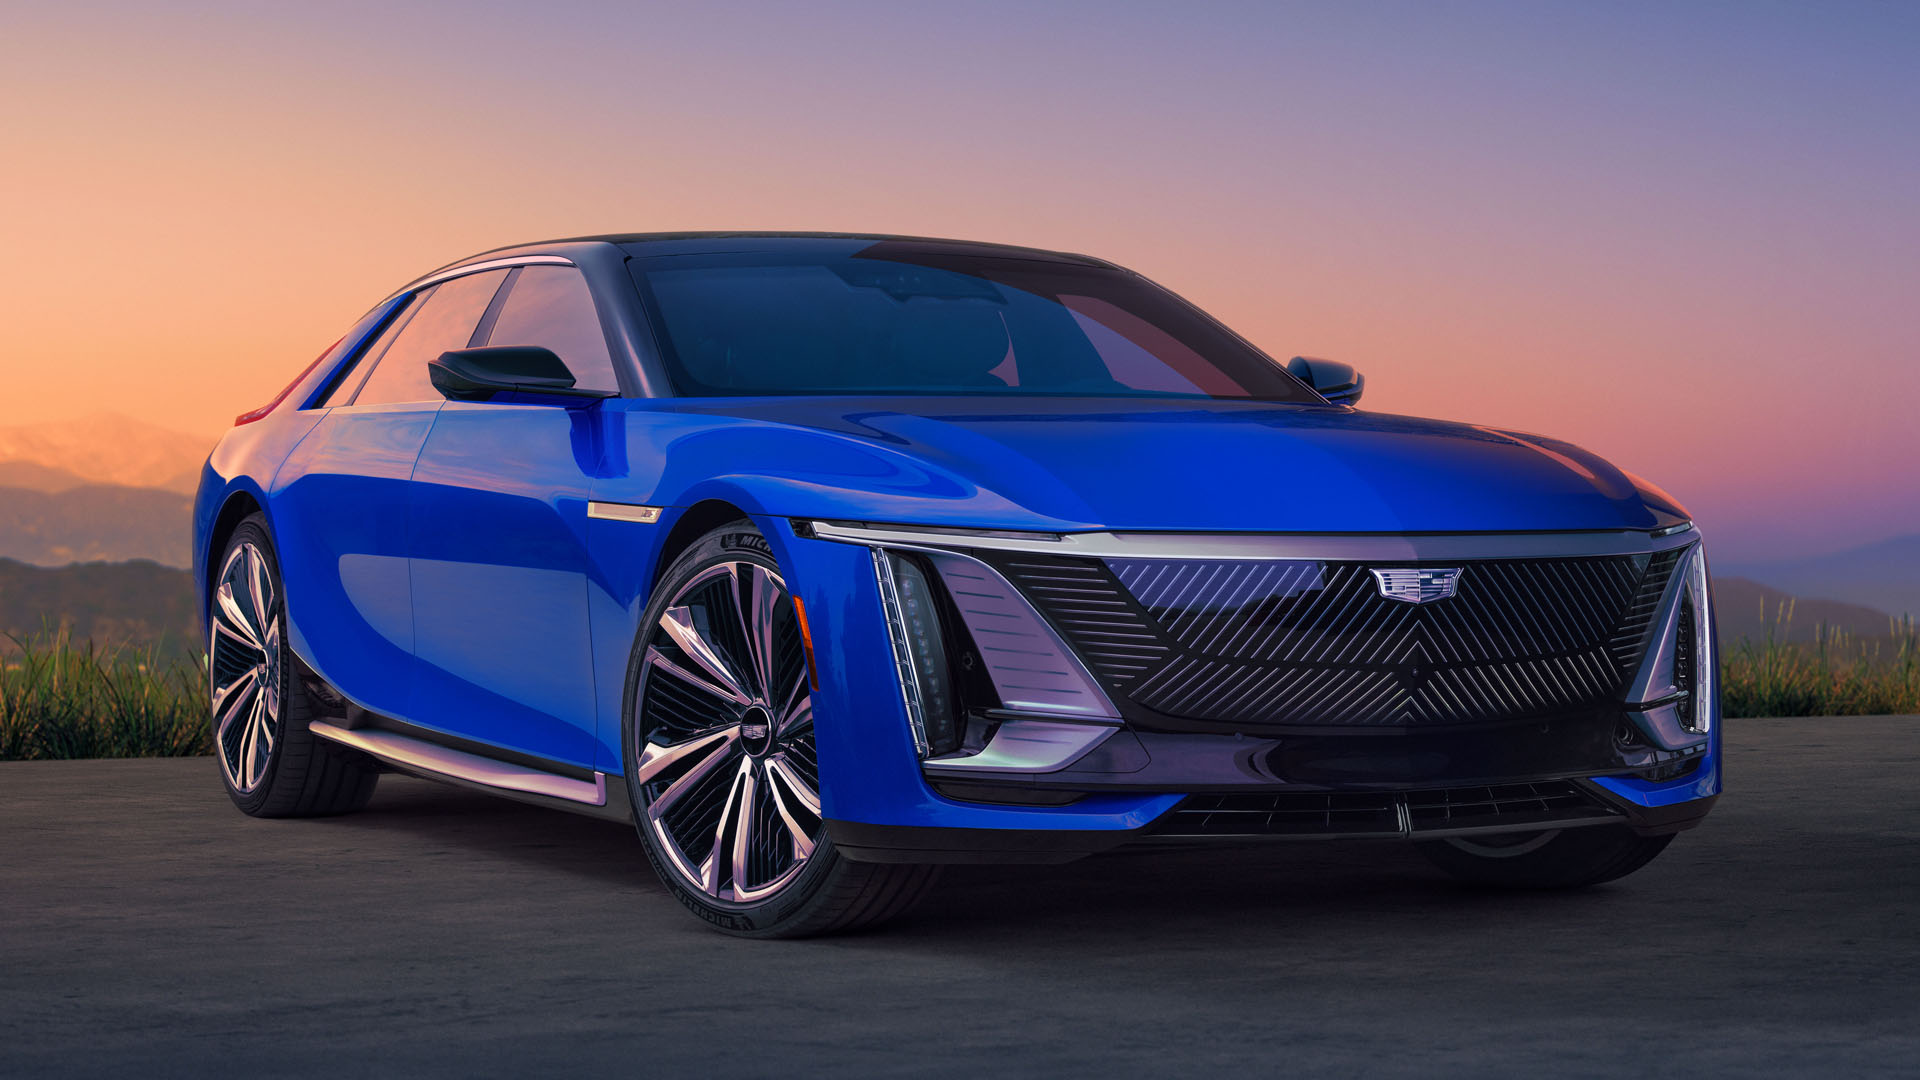 The 2024 Cadillac Celestiq EV Will Be the Most Expensive Cadillac Ever